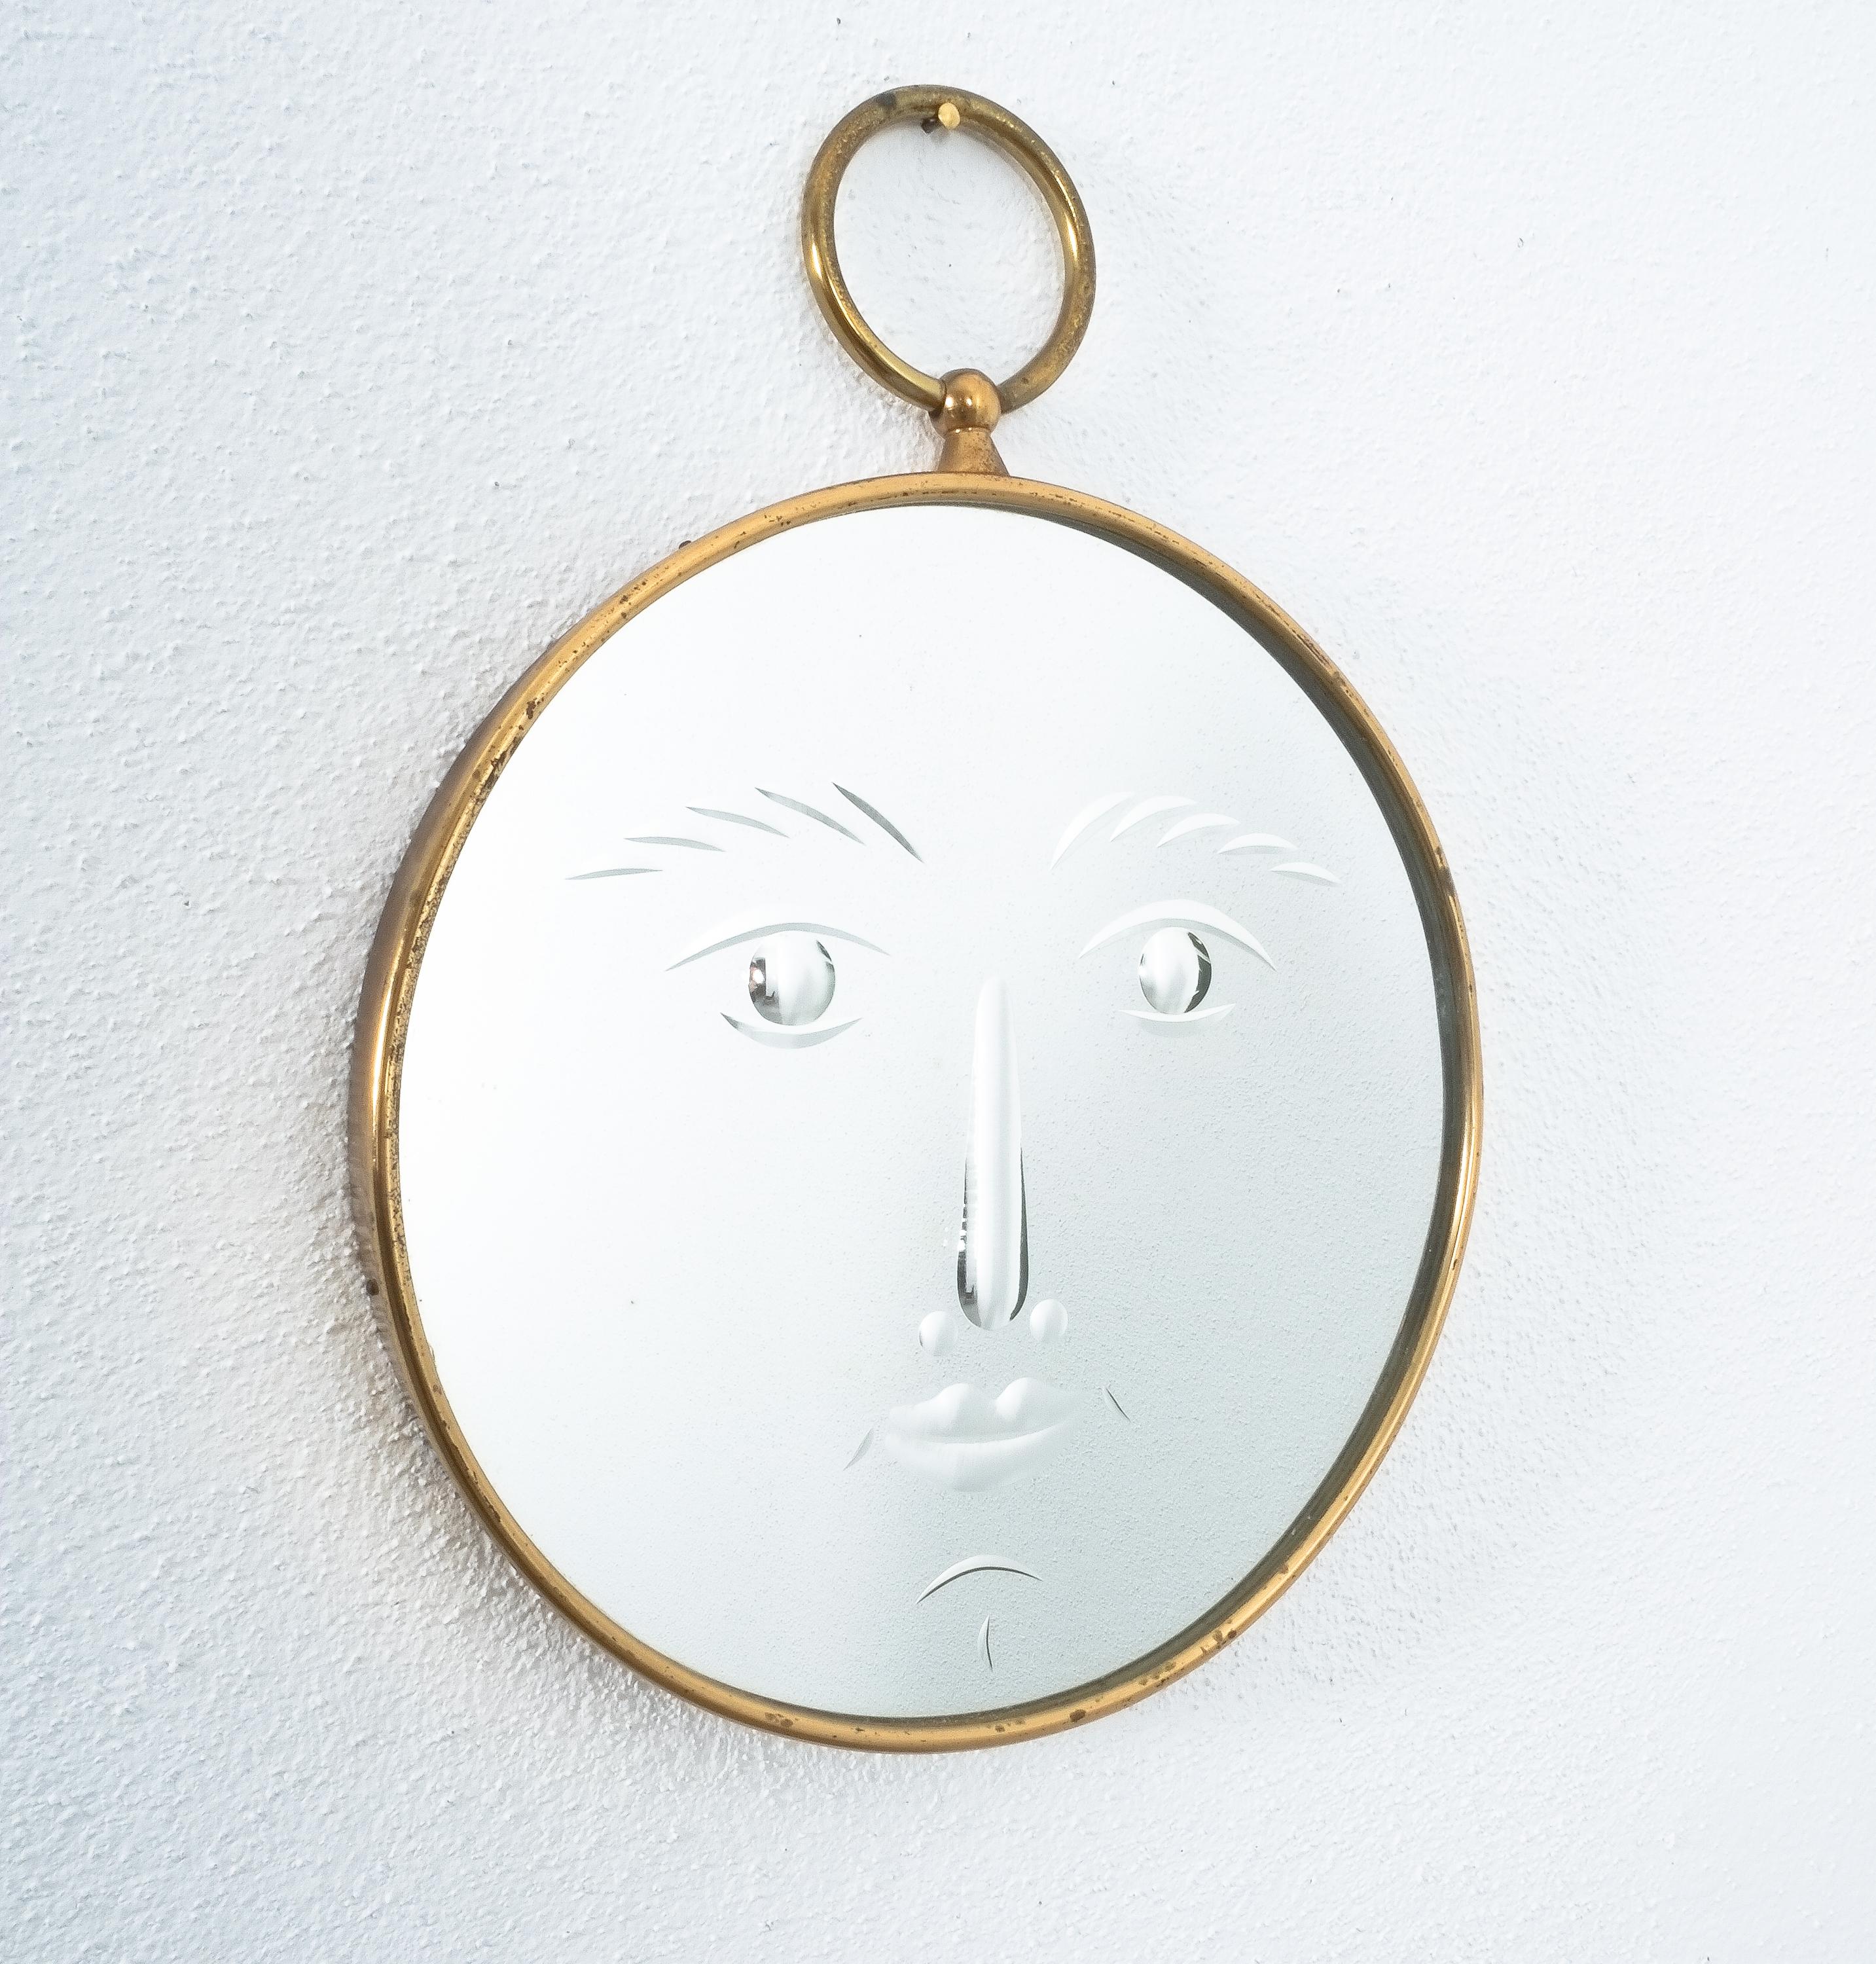 Very rare surrealistic face mirror 'Viso' by Piero Fornasetti, Italy, from the early 1960.

Slightly smiling, charming original mirror by Piero Fornasetti from the 1960's featuring a hand bevelled mirror glass in a brass frame. The mirror is in very